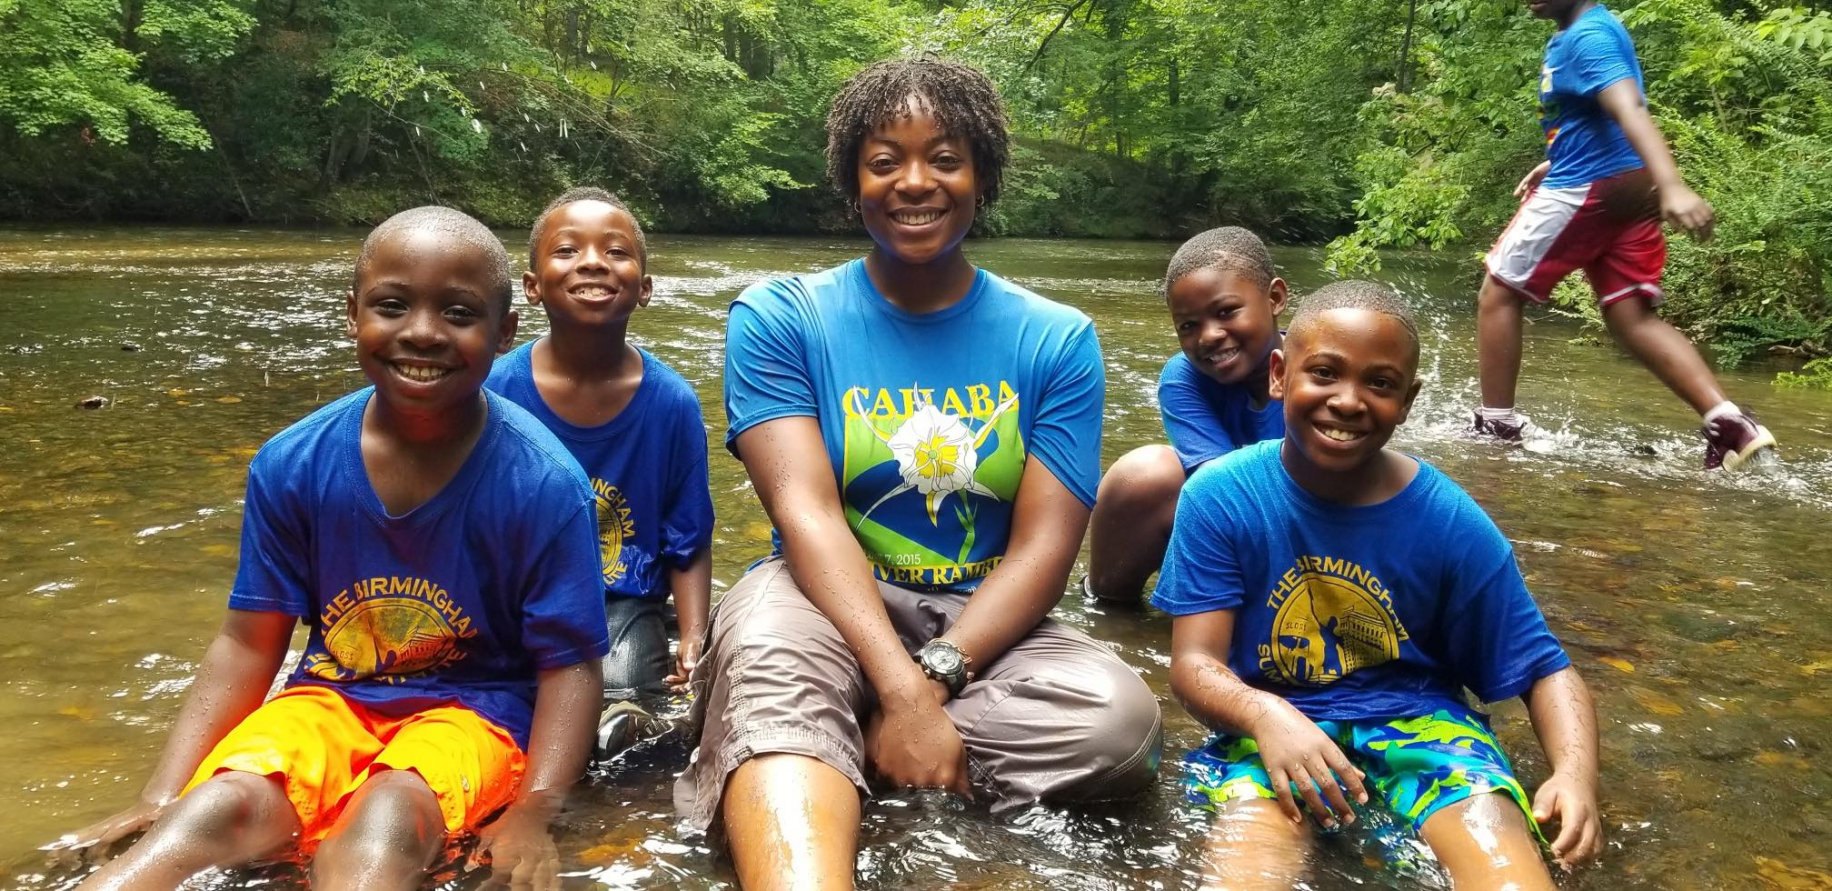 LaTanya and Bham CLEAN kids in River What will Alabama look like in 2119? With proper planning it can be a stunning oasis for people, business and wildlife.